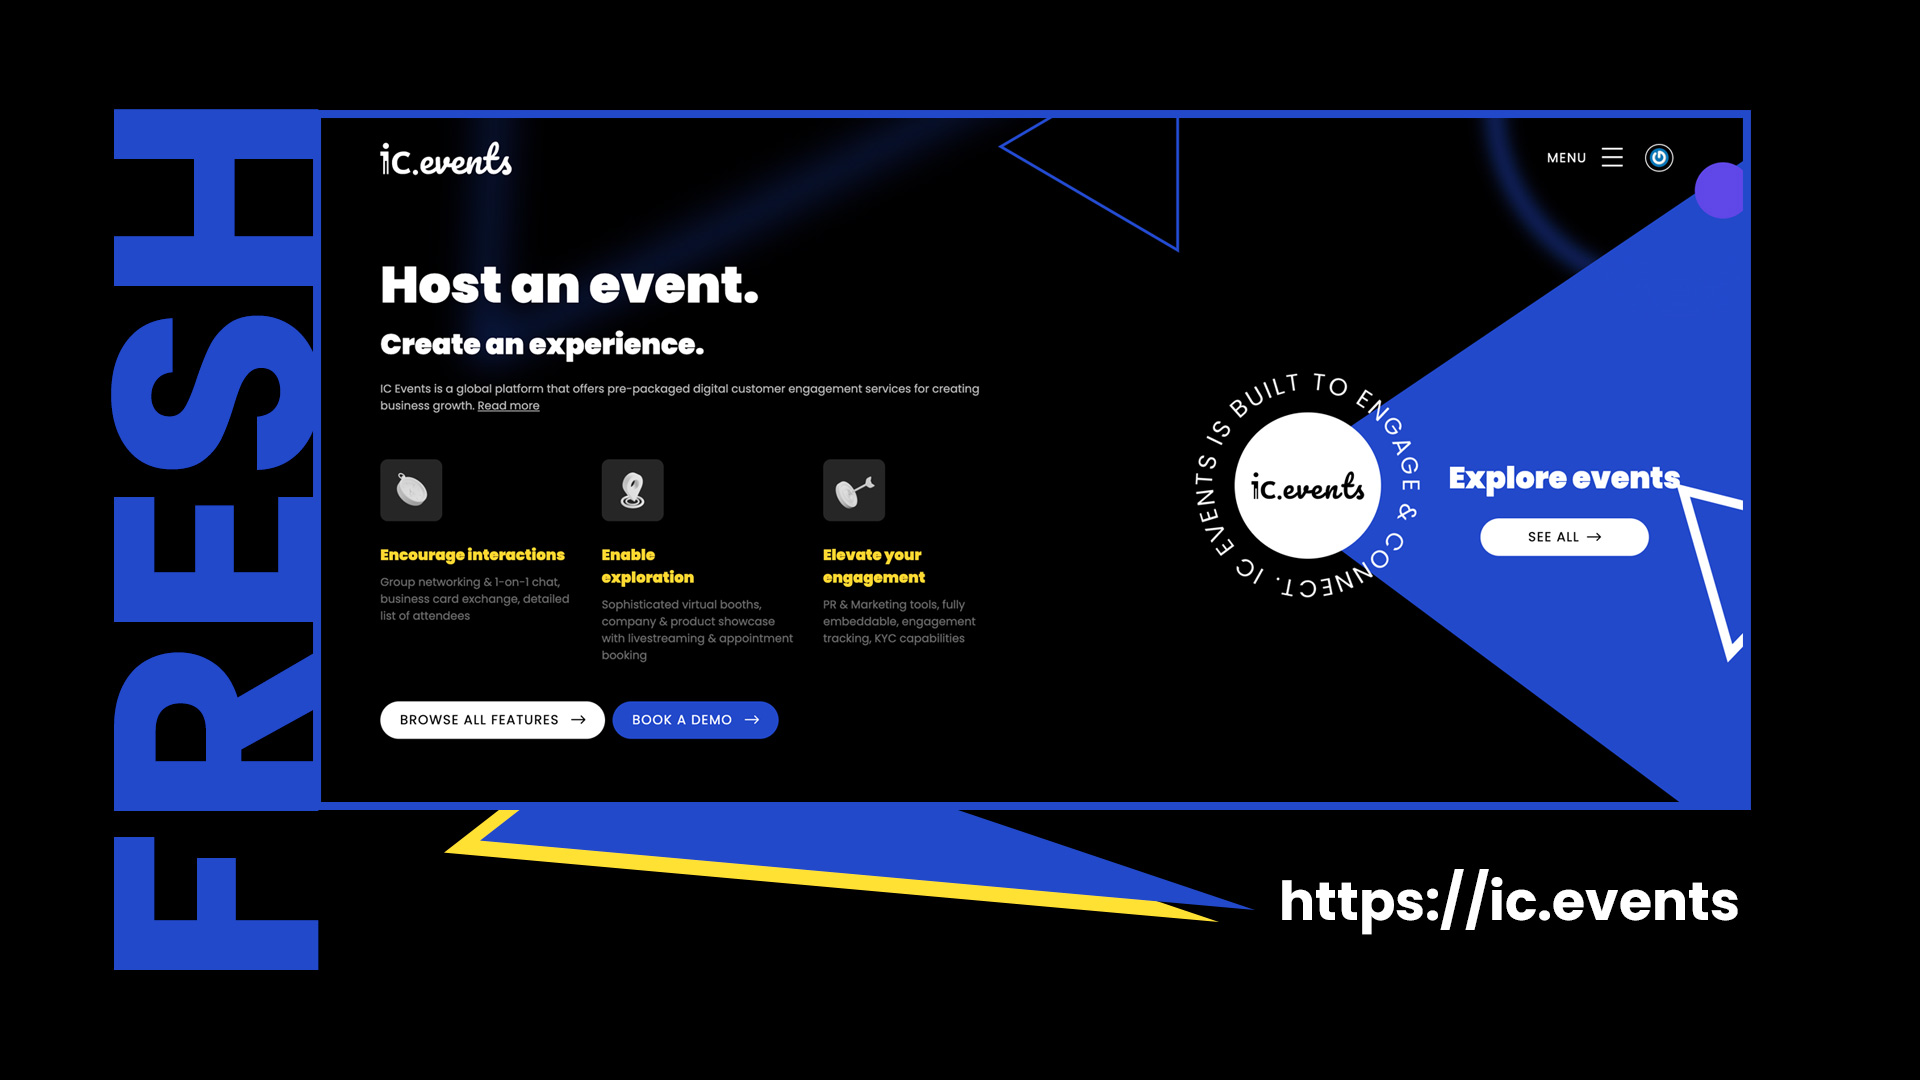 IC Events, InternetCorp’s platform that brings events in the digital era, goes to the next level